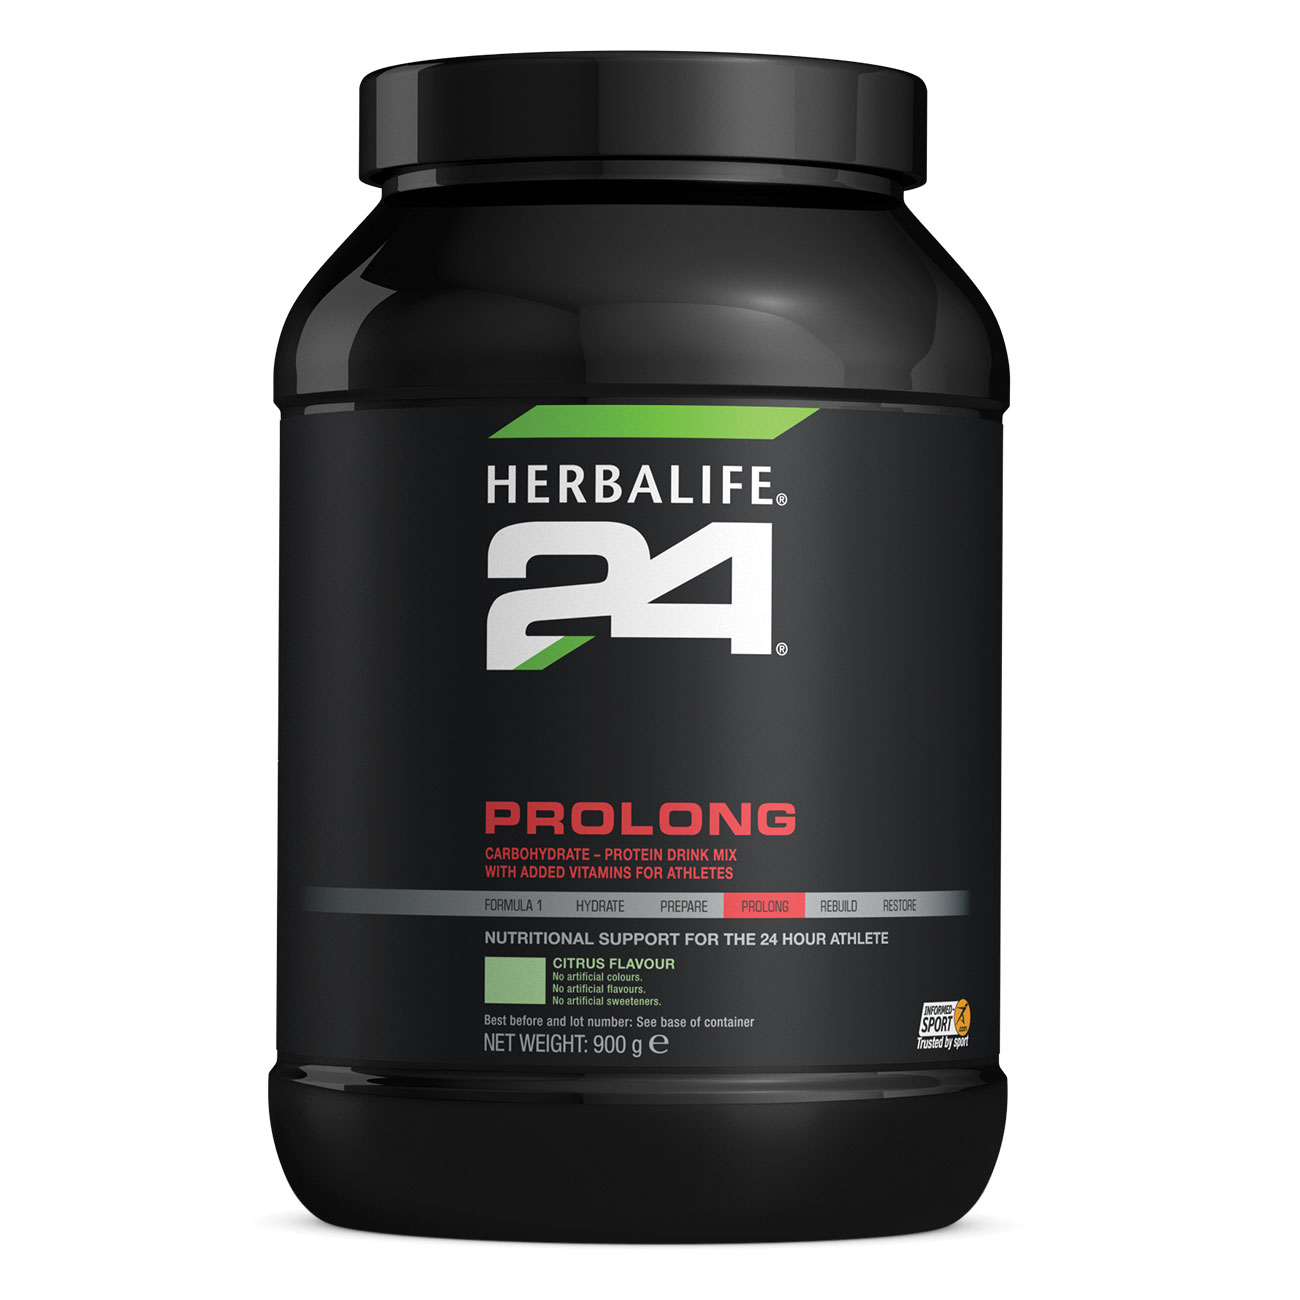 Herbalife24® Prolong Protein Drink Citrus product shot